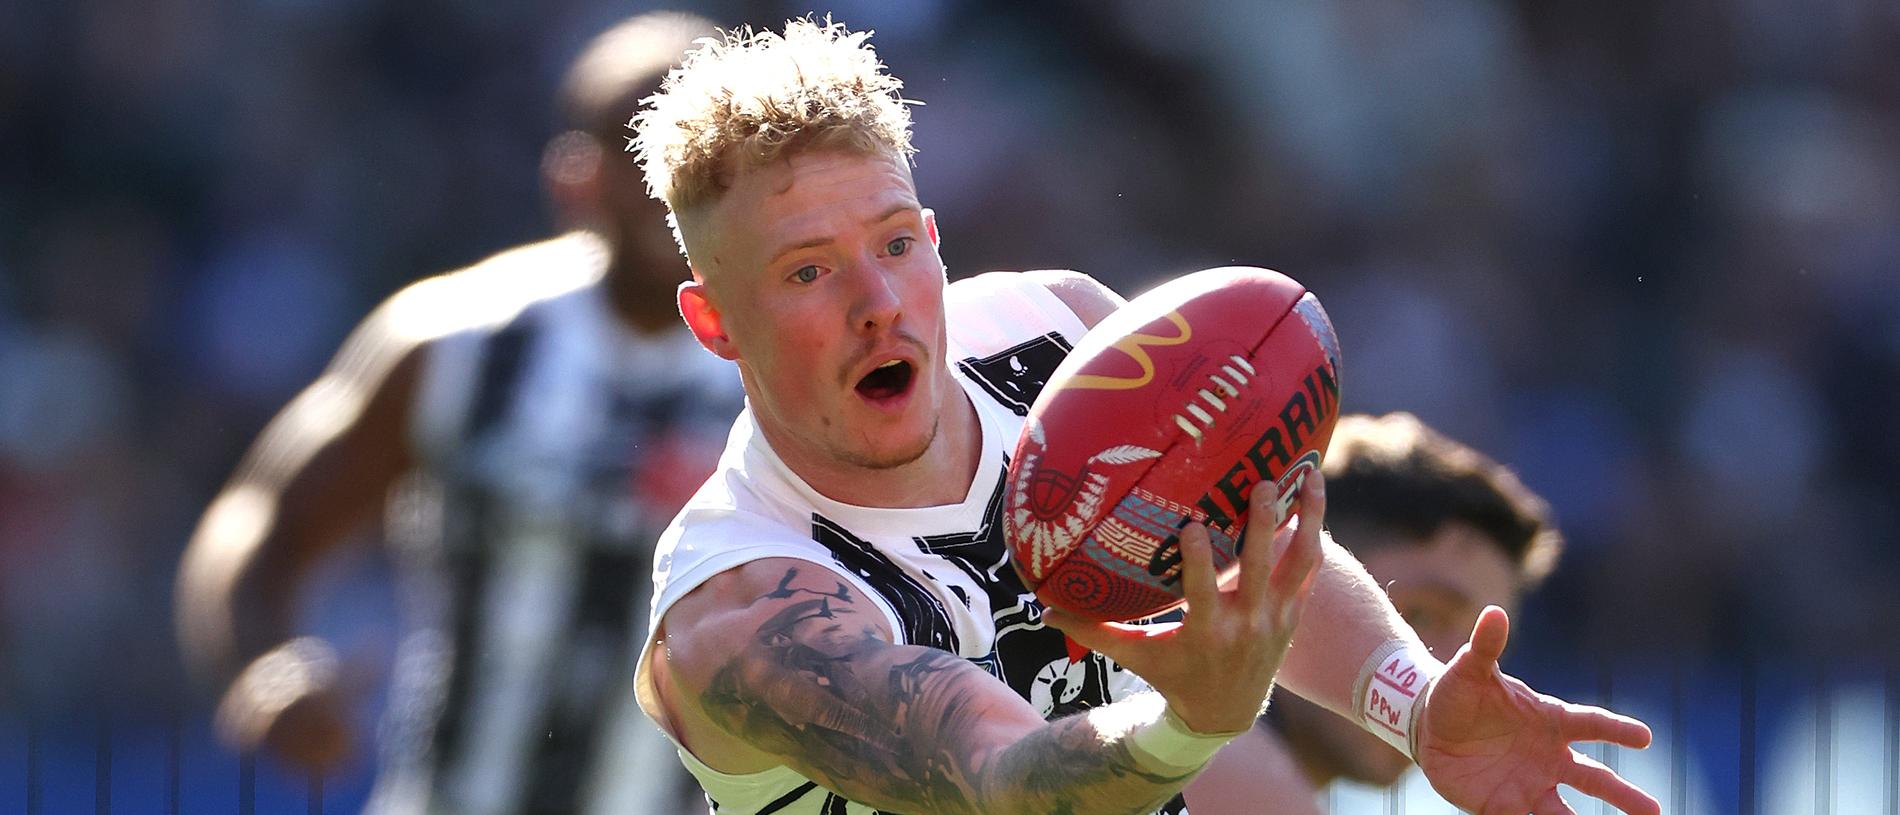 MELBOURNE, AUSTRALIA - MAY 18: John Noble of the Magpies marks during the round 10 AFL match between Collingwood Magpies and Kuwarna (the Adelaide Crows) at Melbourne Cricket Ground, on May 18, 2024, in Melbourne, Australia. (Photo by Quinn Rooney/Getty Images)